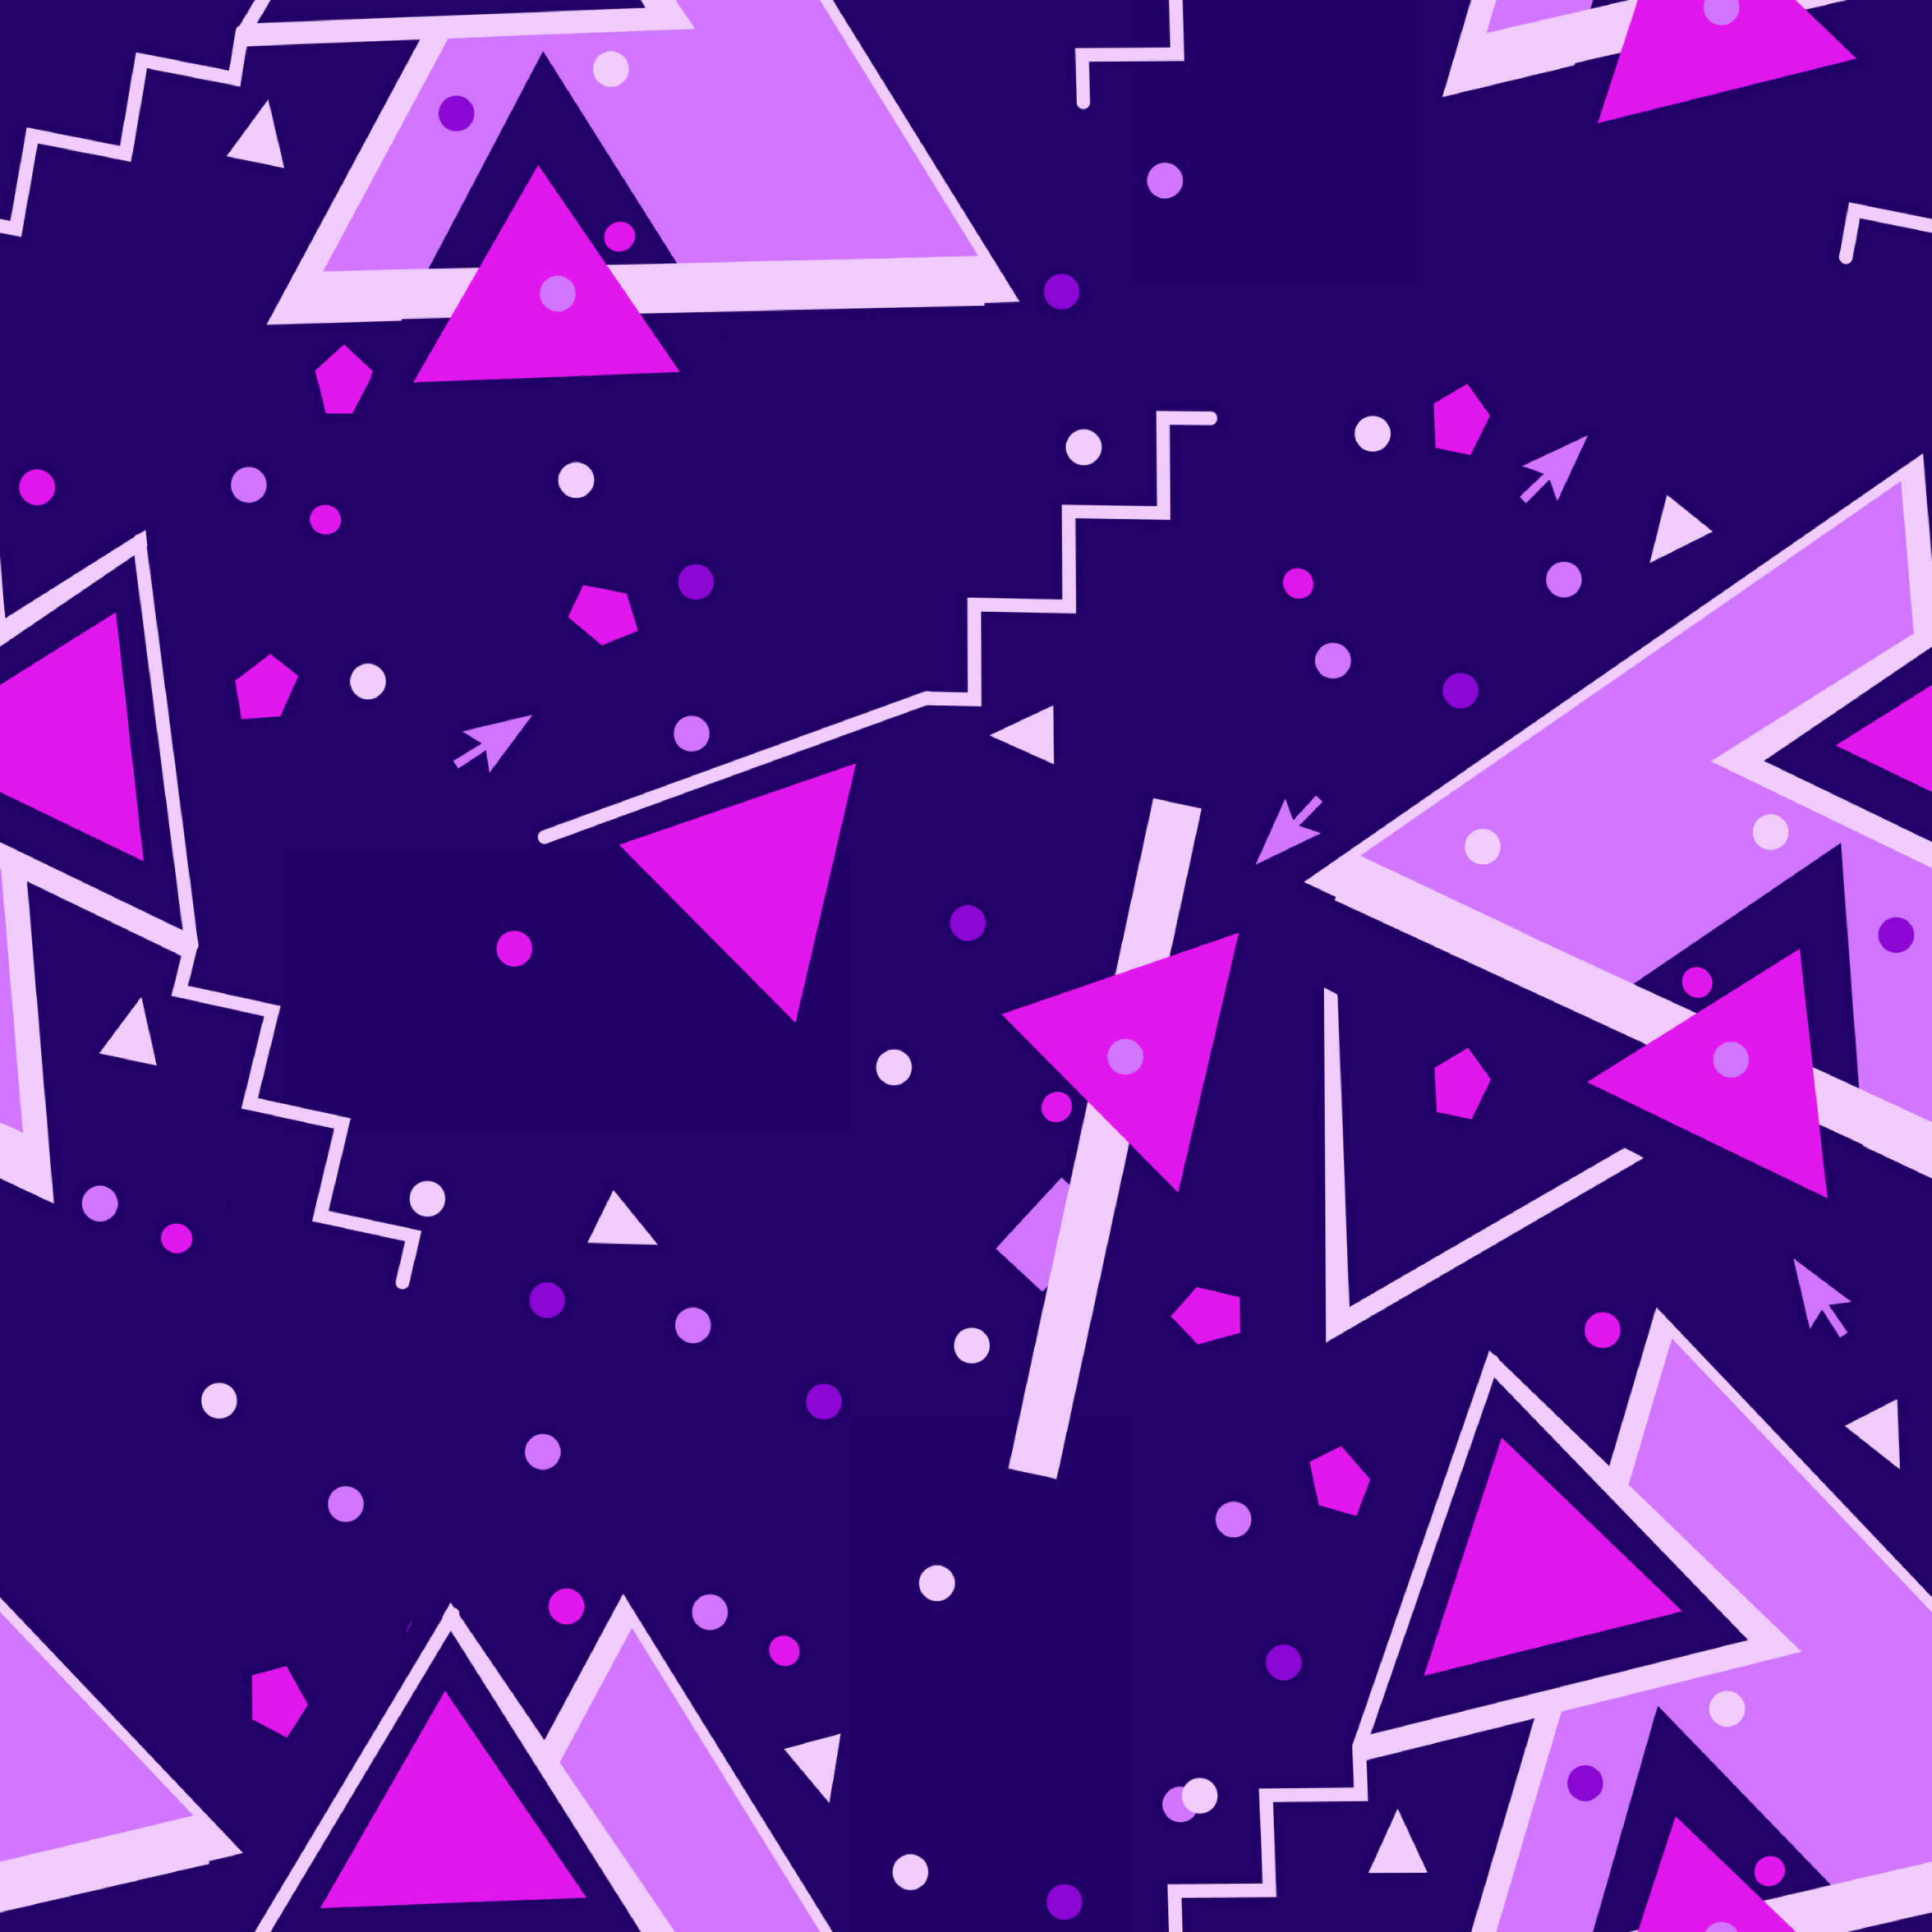 Download wallpaper 3000x3000 triangles, triangle, colorful